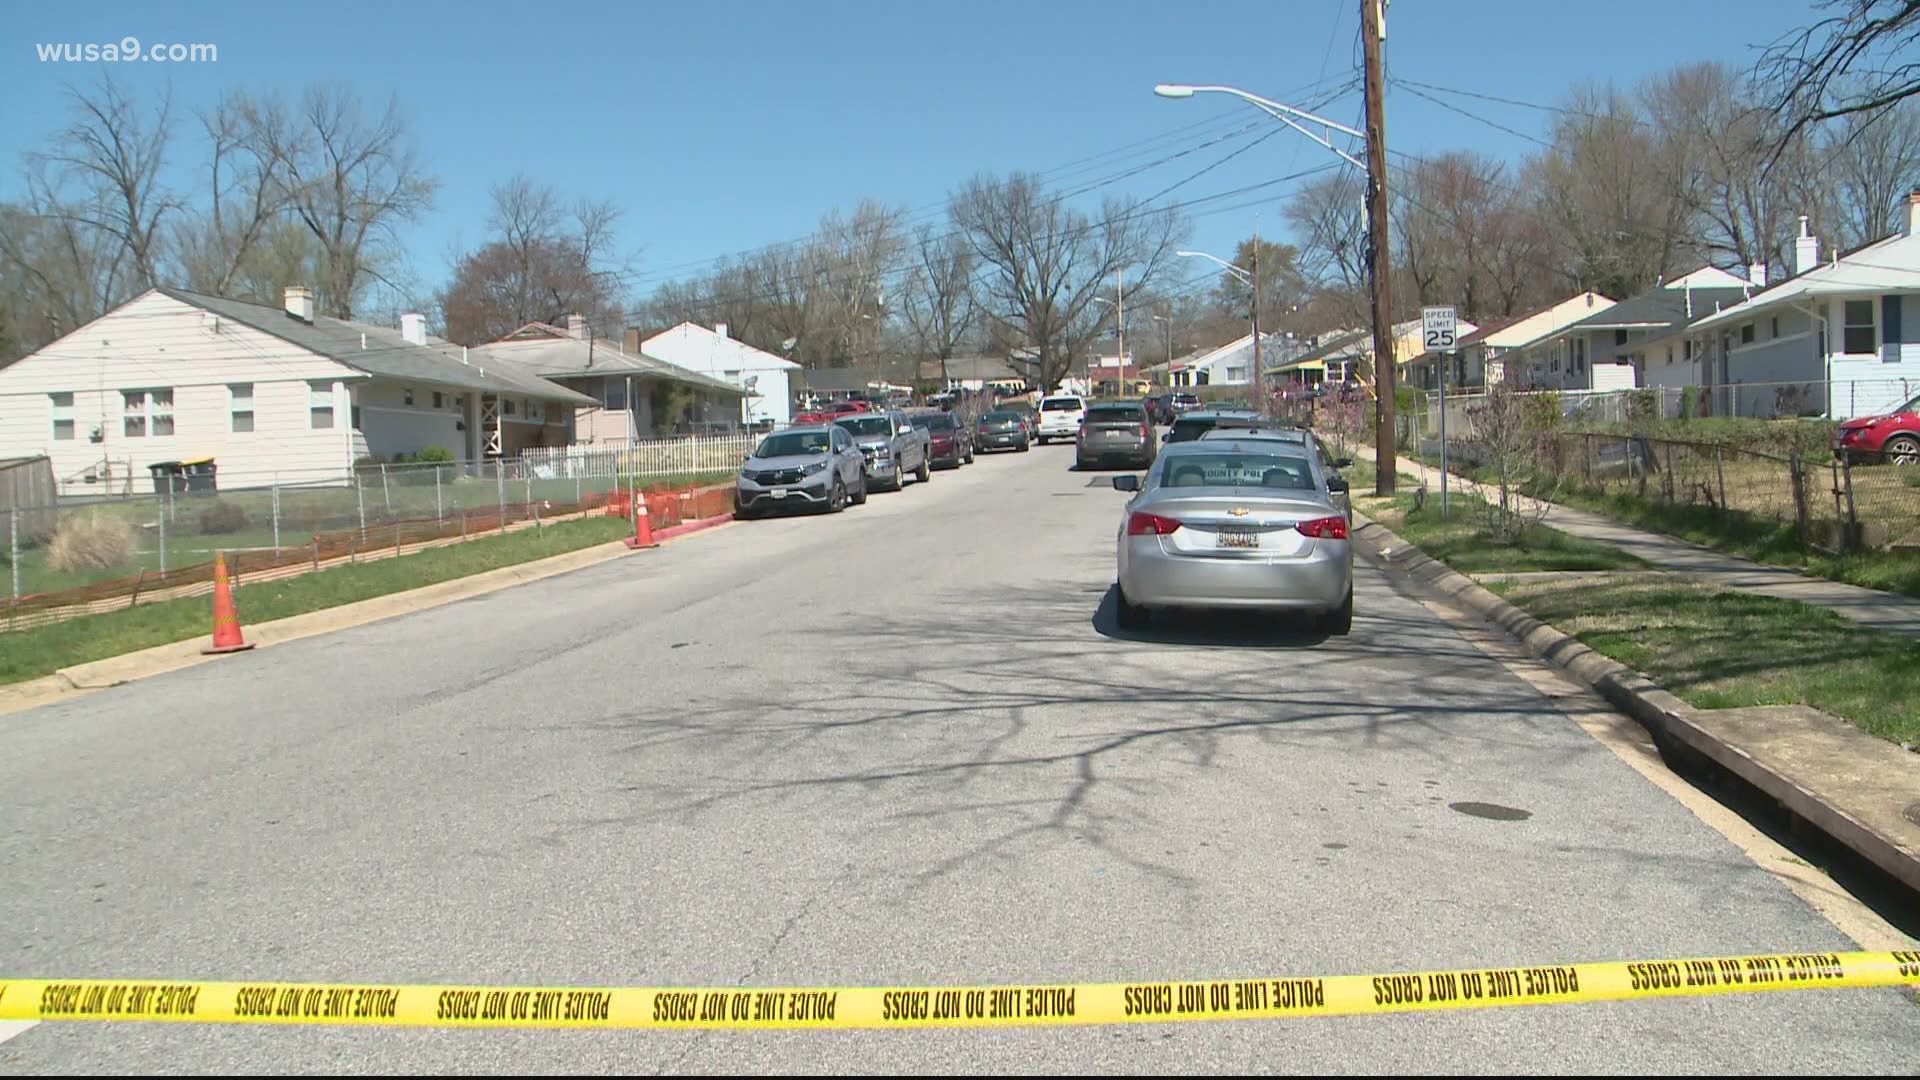 Police found a man shot to death in the middle of a residential street. Three other shootings, including one a birthday party, killed two other people.